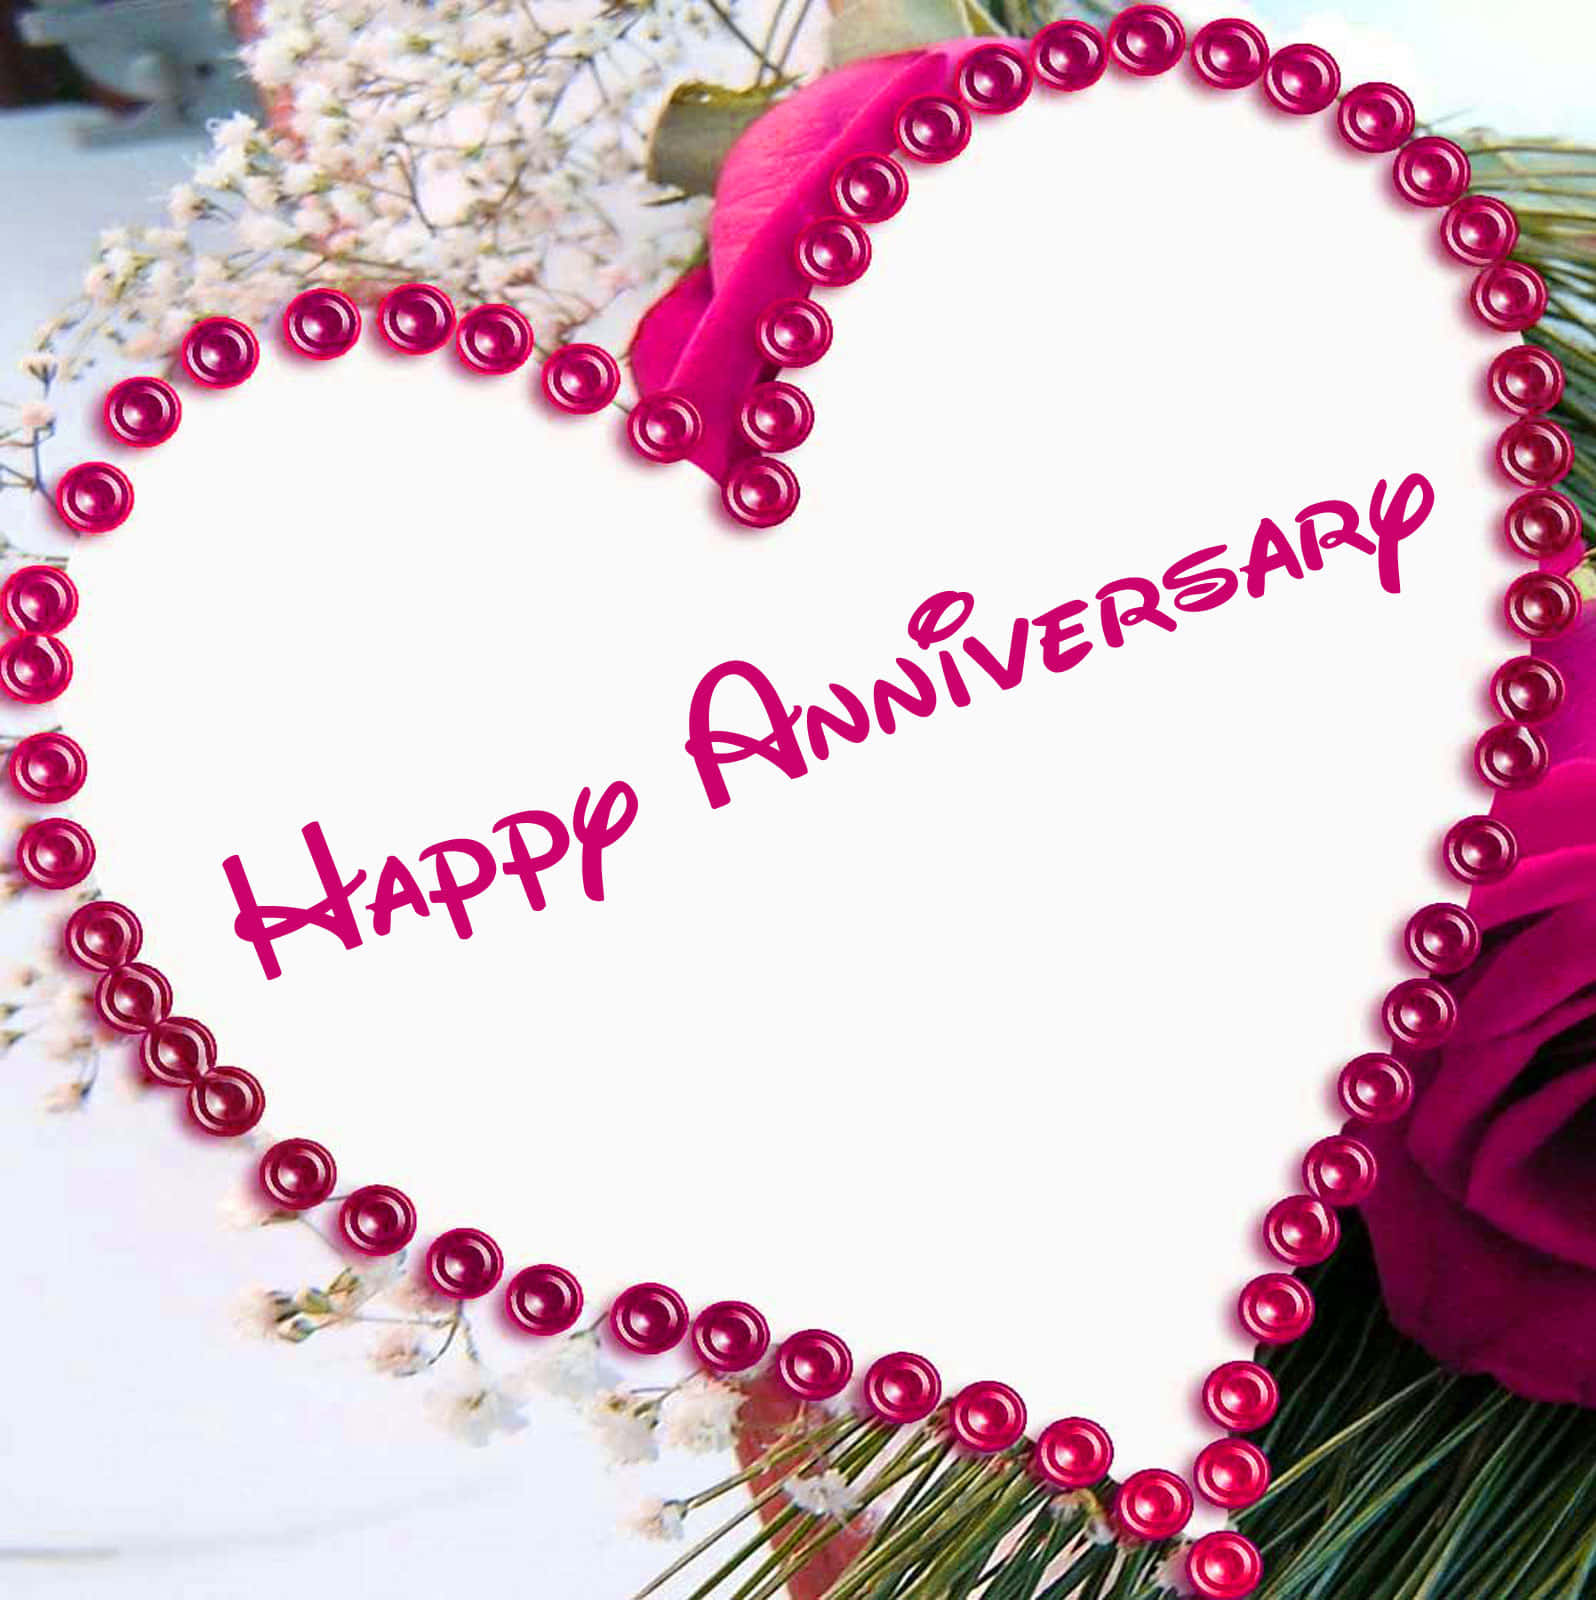 Anniversary Cake Designed With Pink Pearls Background